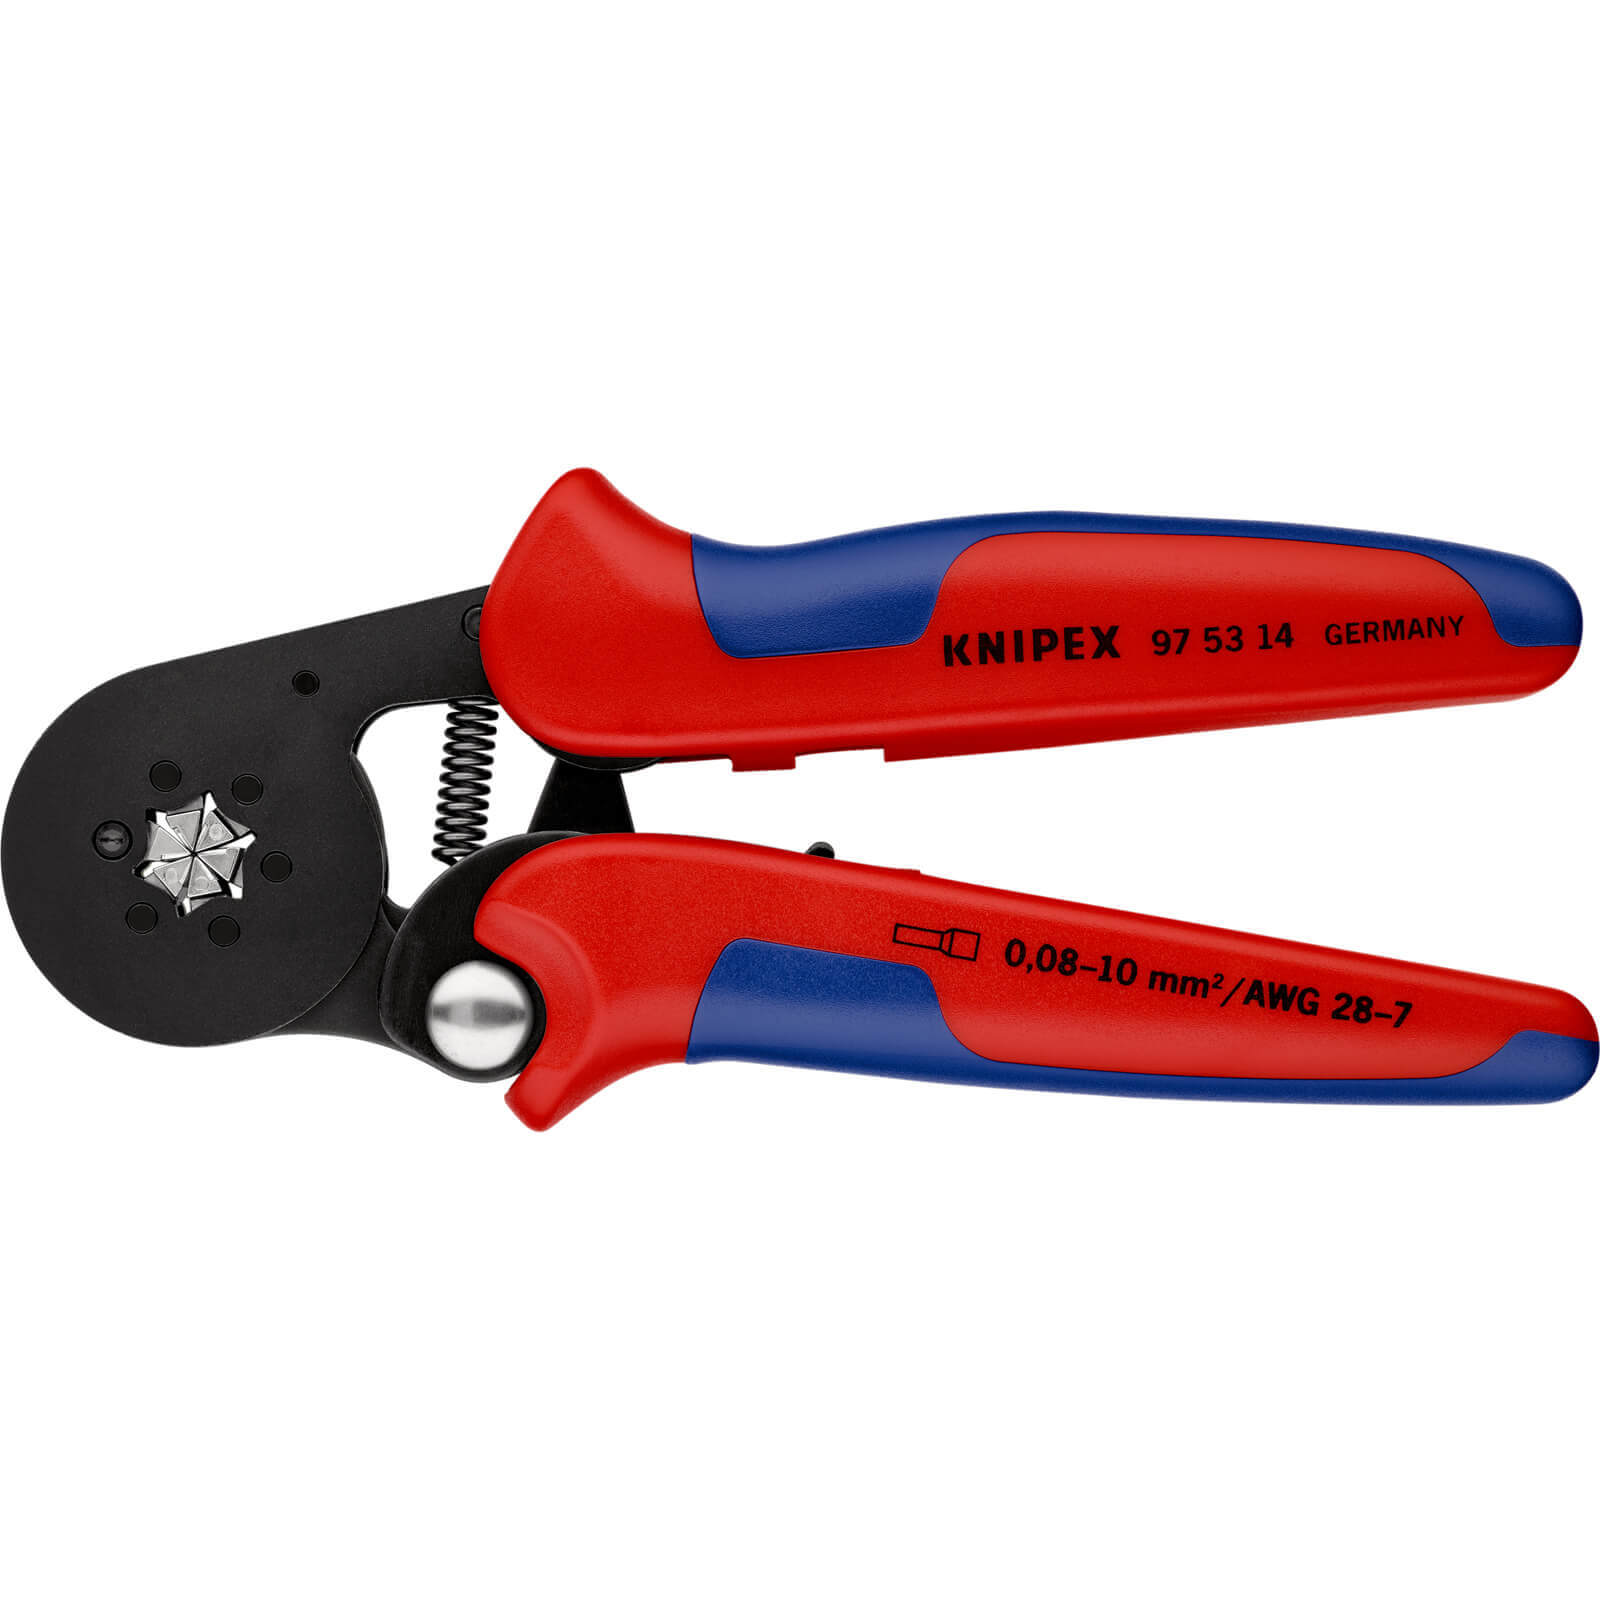 Knipex 97 53 Lateral Access Self Adjusting Crimping Pliers